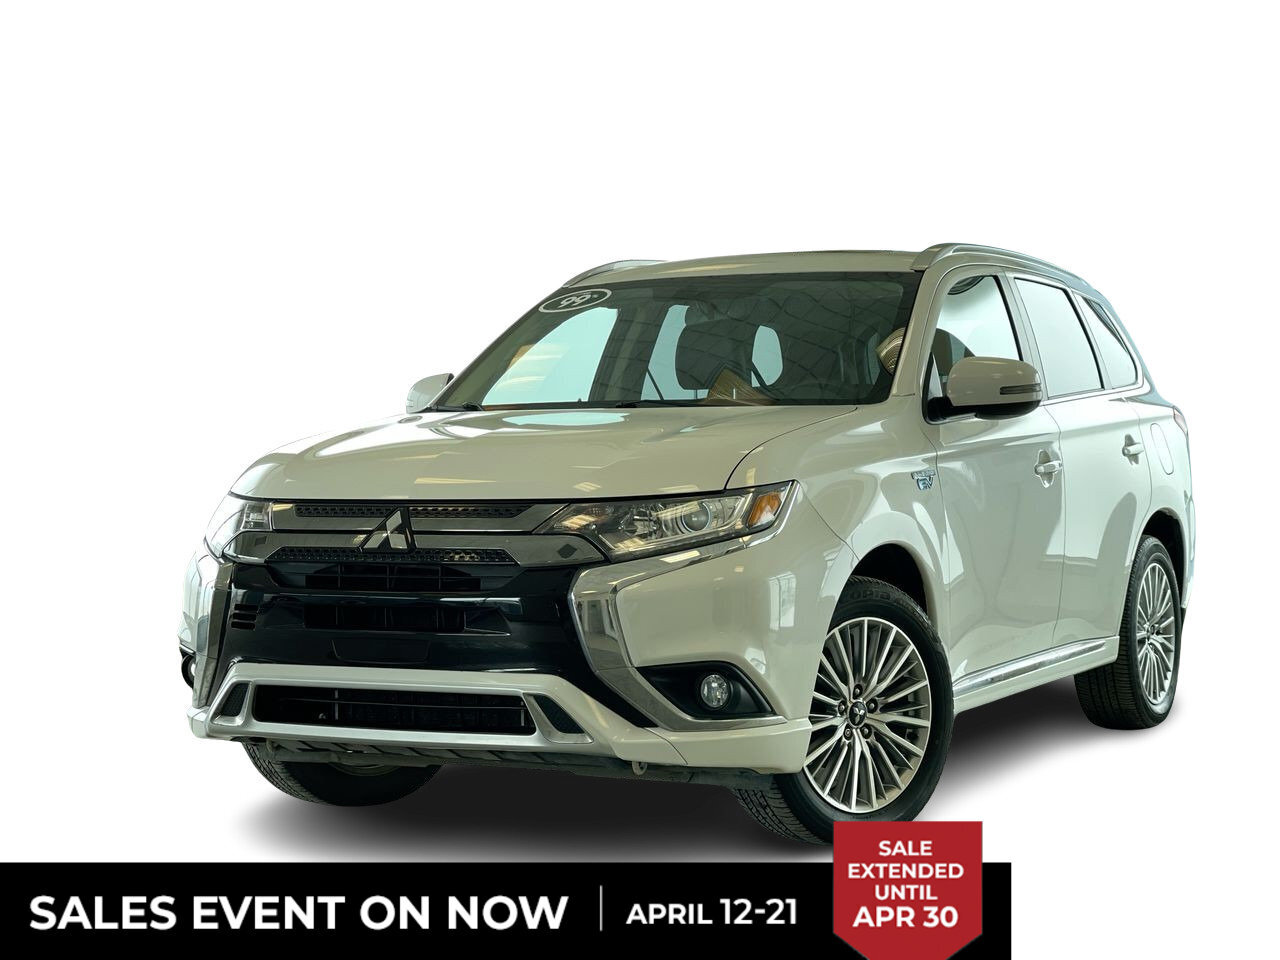 2020 Mitsubishi Outlander PHEV LE S-AWC, Heated Seats, Sunroof No Reported Accide